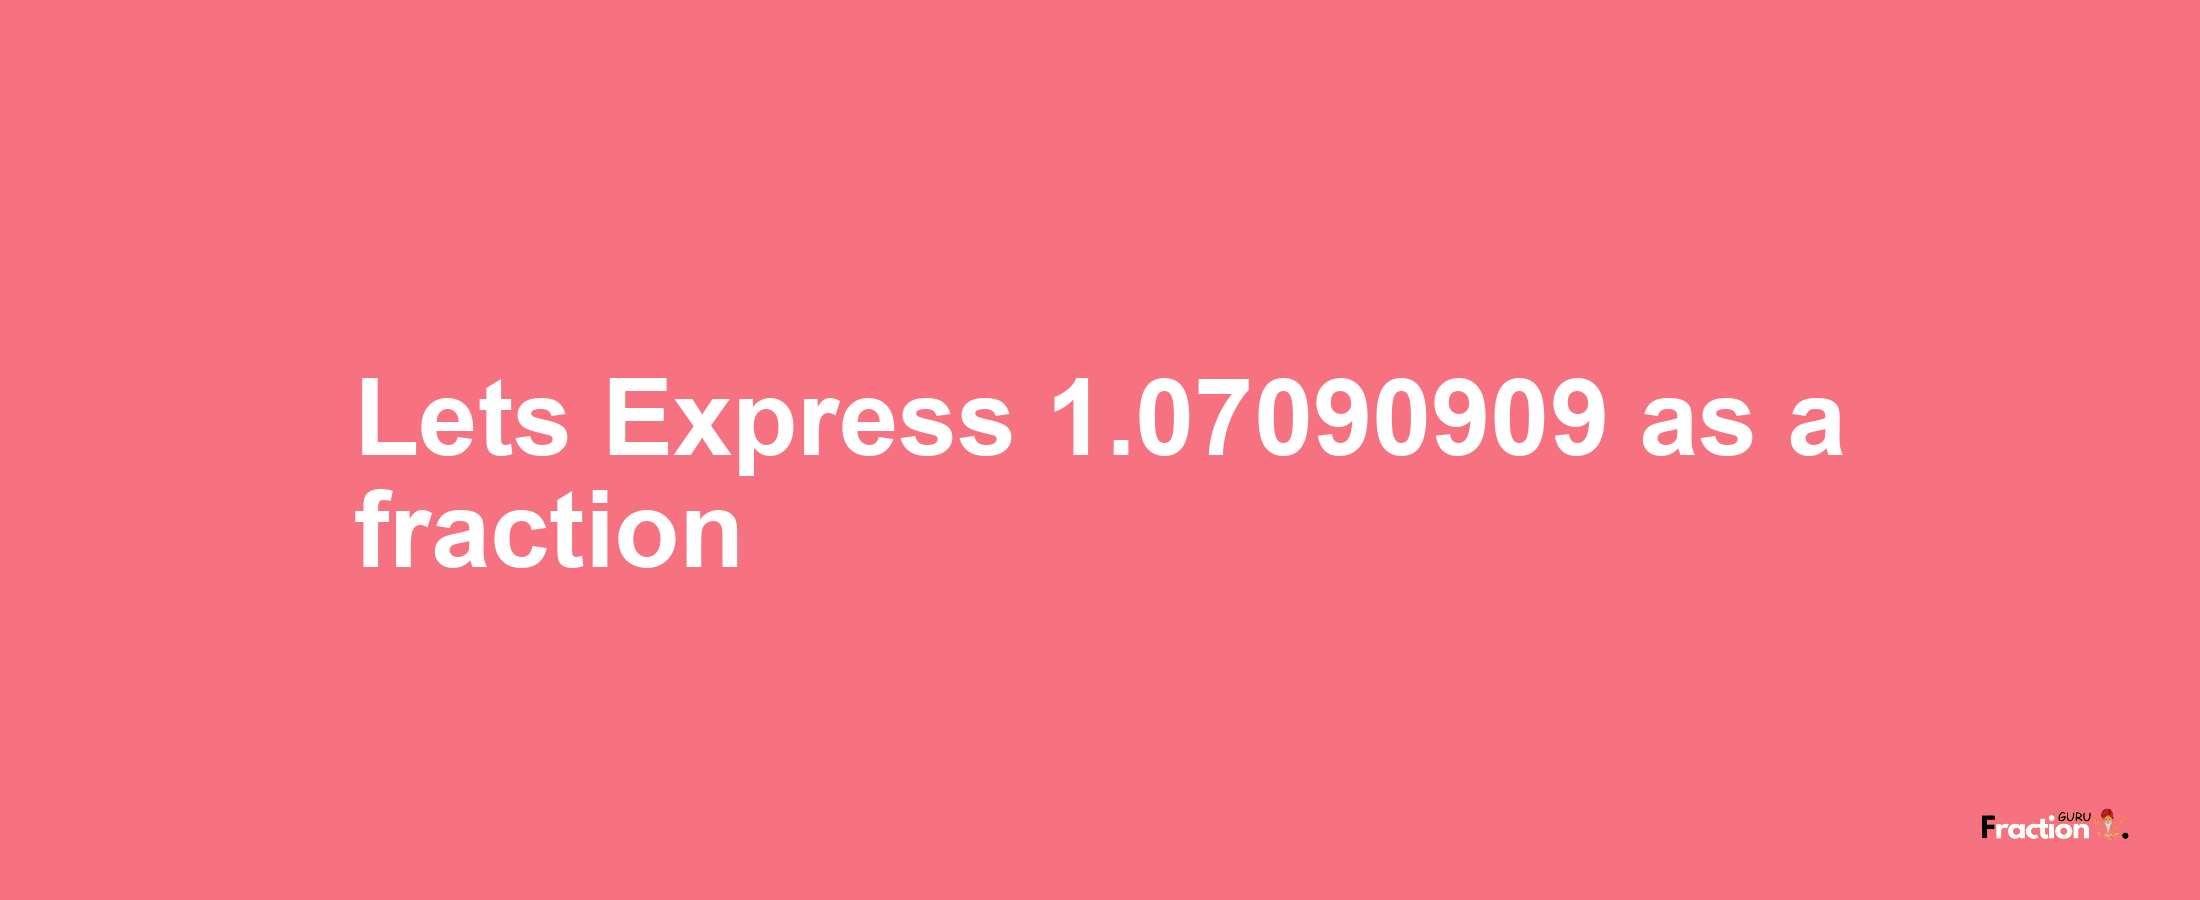 Lets Express 1.07090909 as afraction